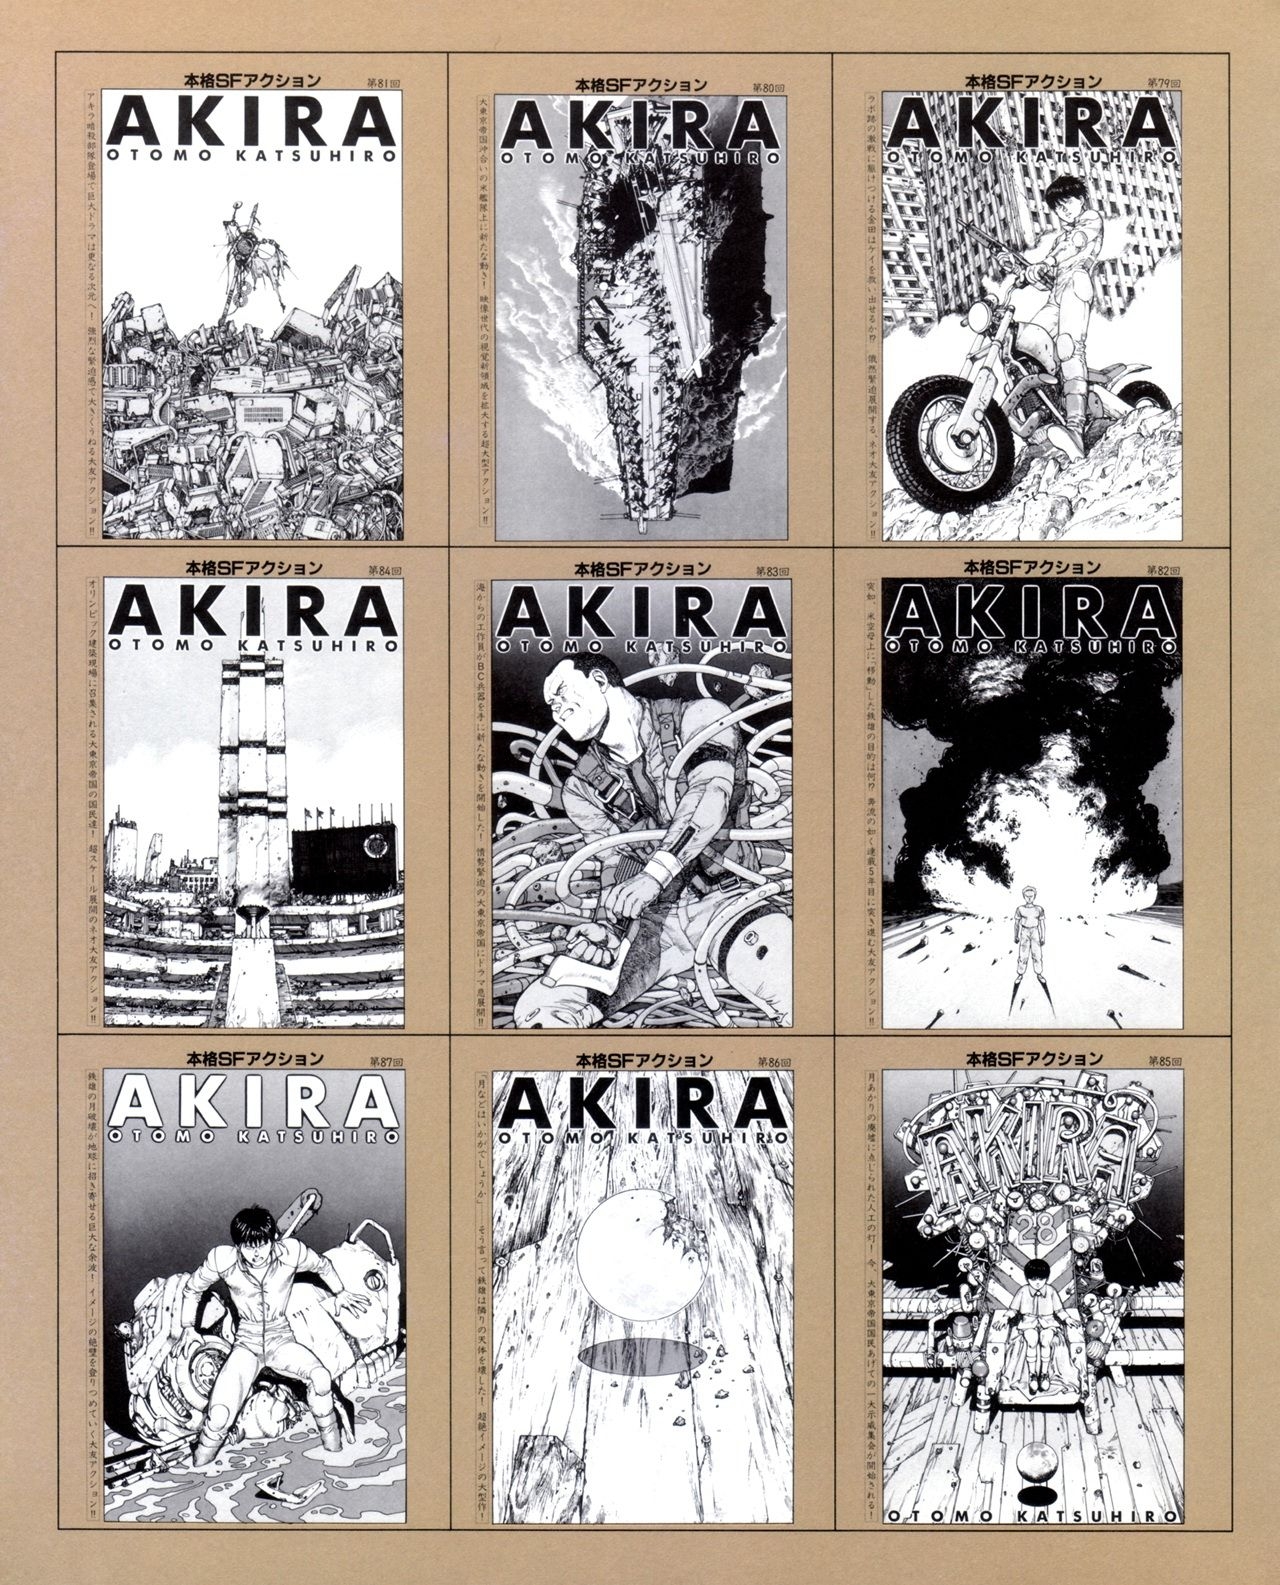 Akira club - The memory of Akira lives on in our hearts! 159